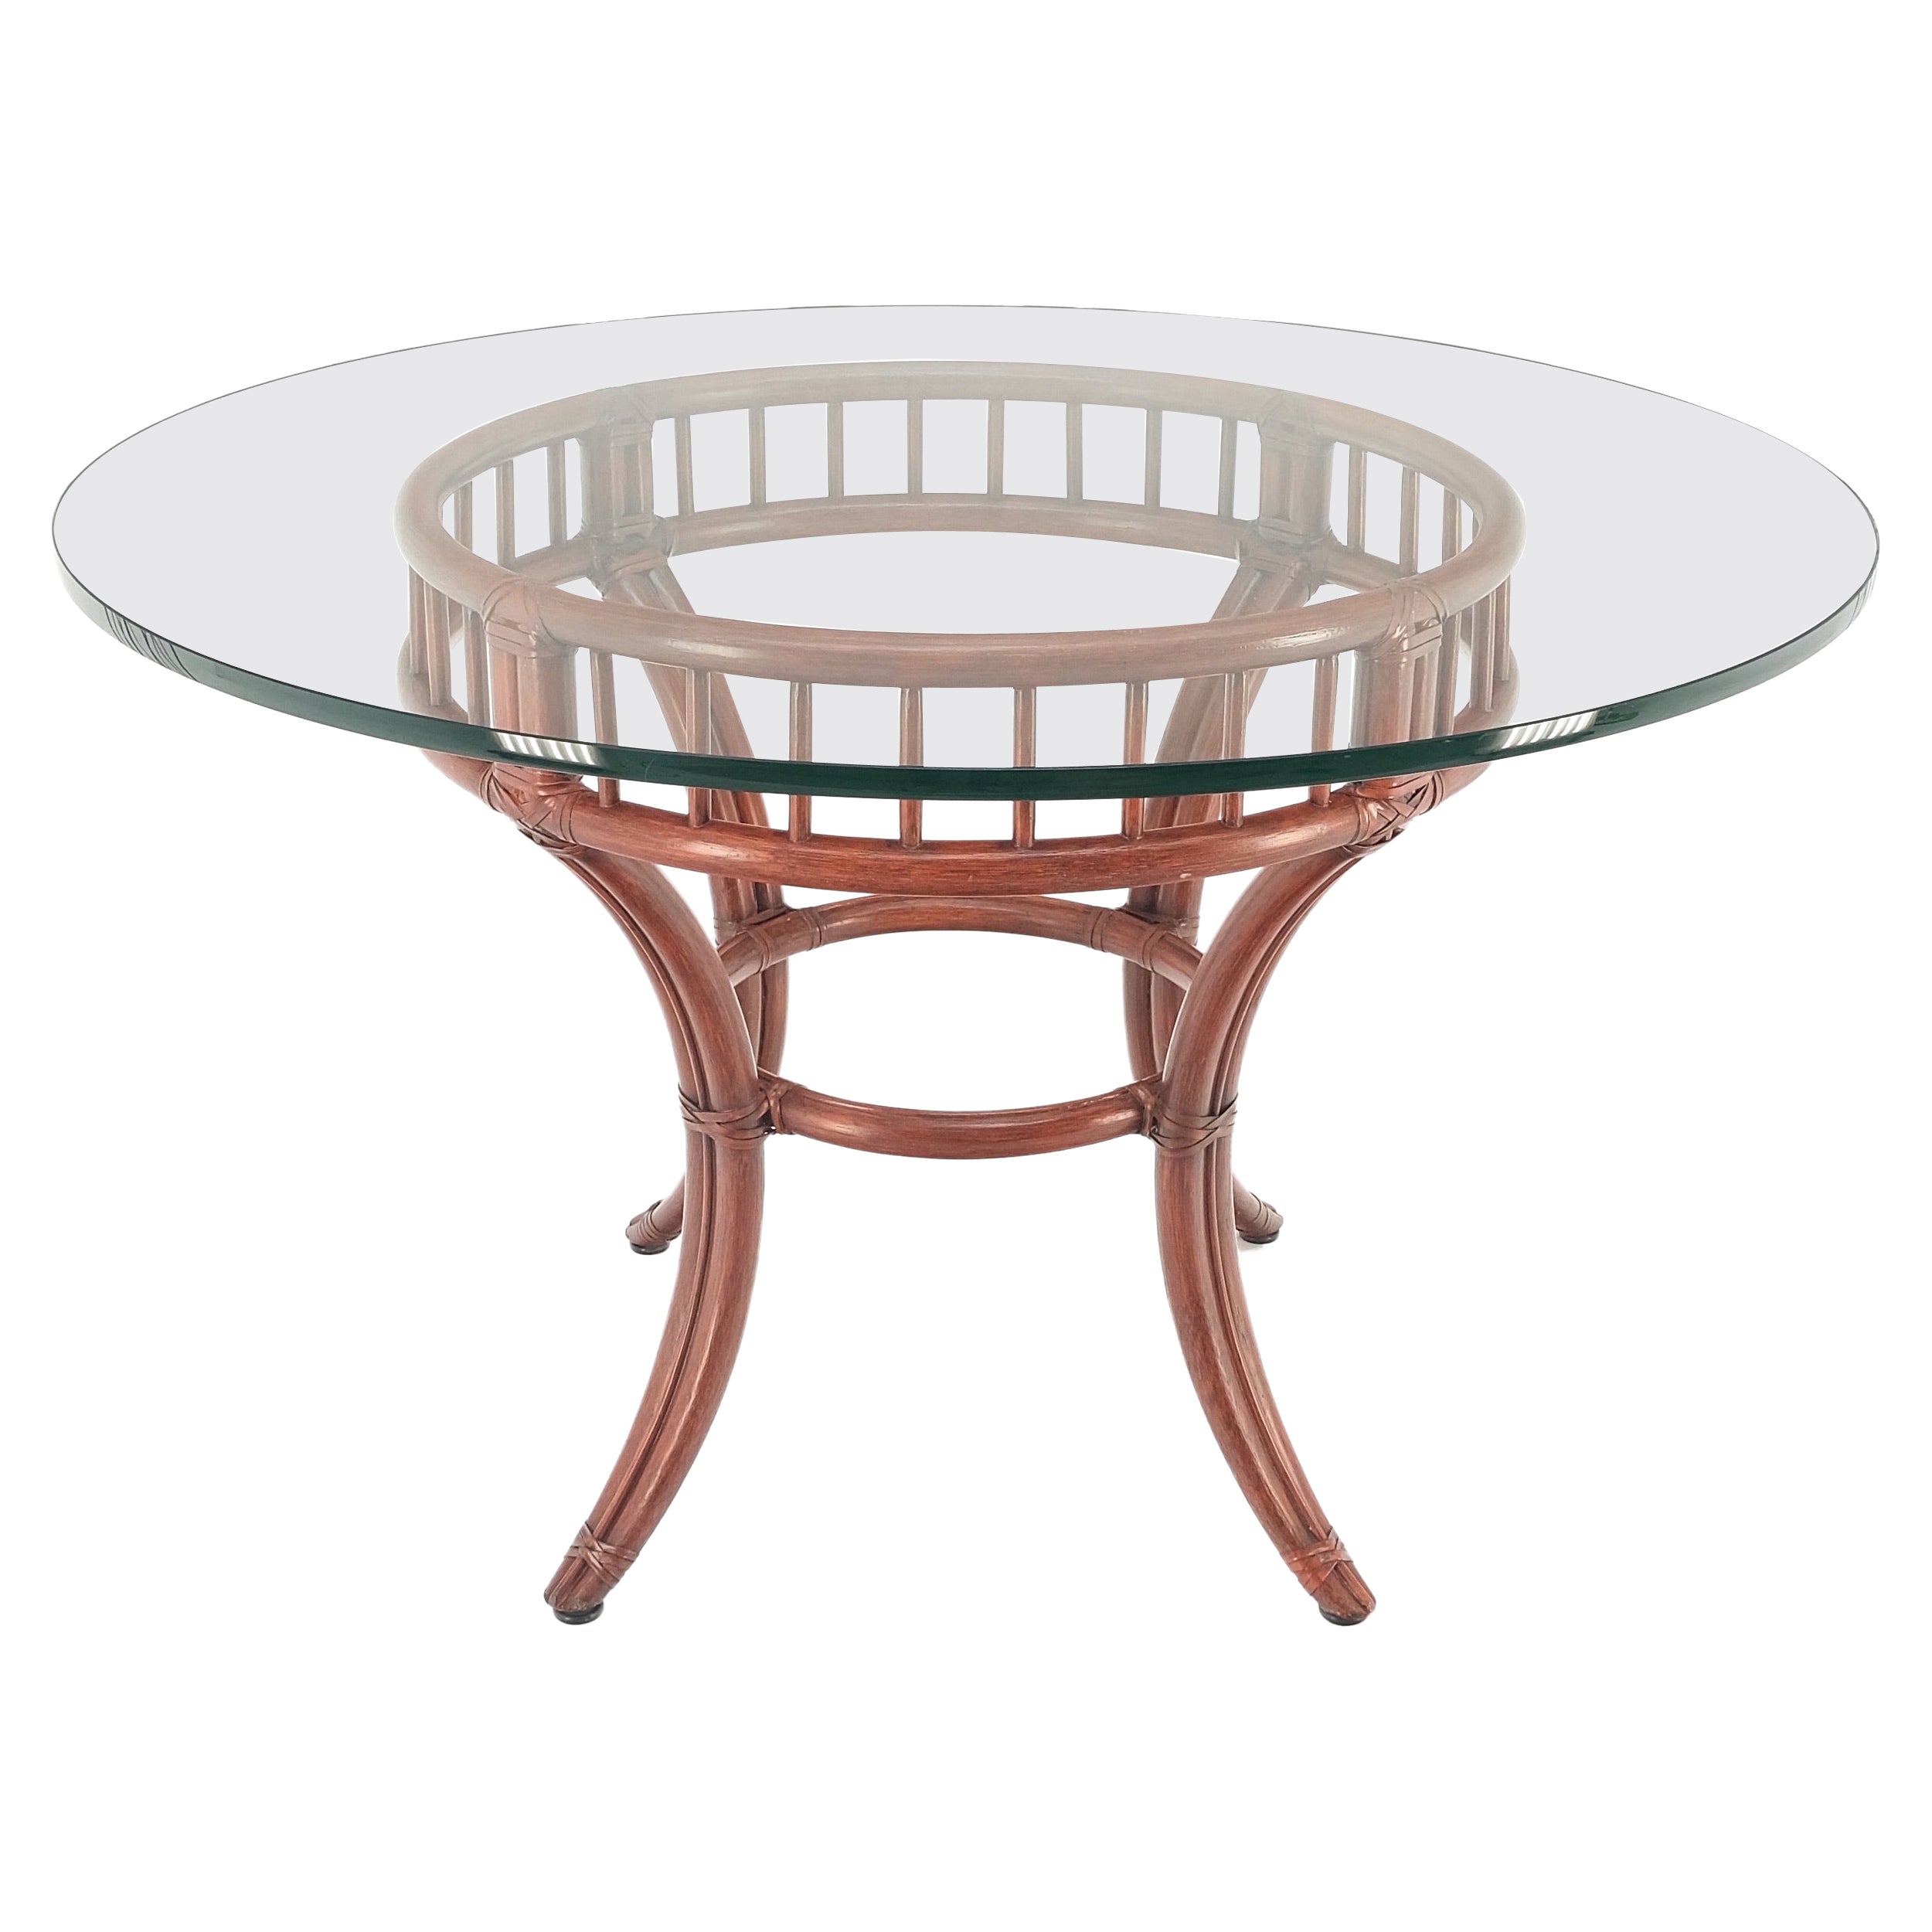 Large Round Bamboo Glass Top MCM Dining Dinette Table by McGuire MINT! For Sale